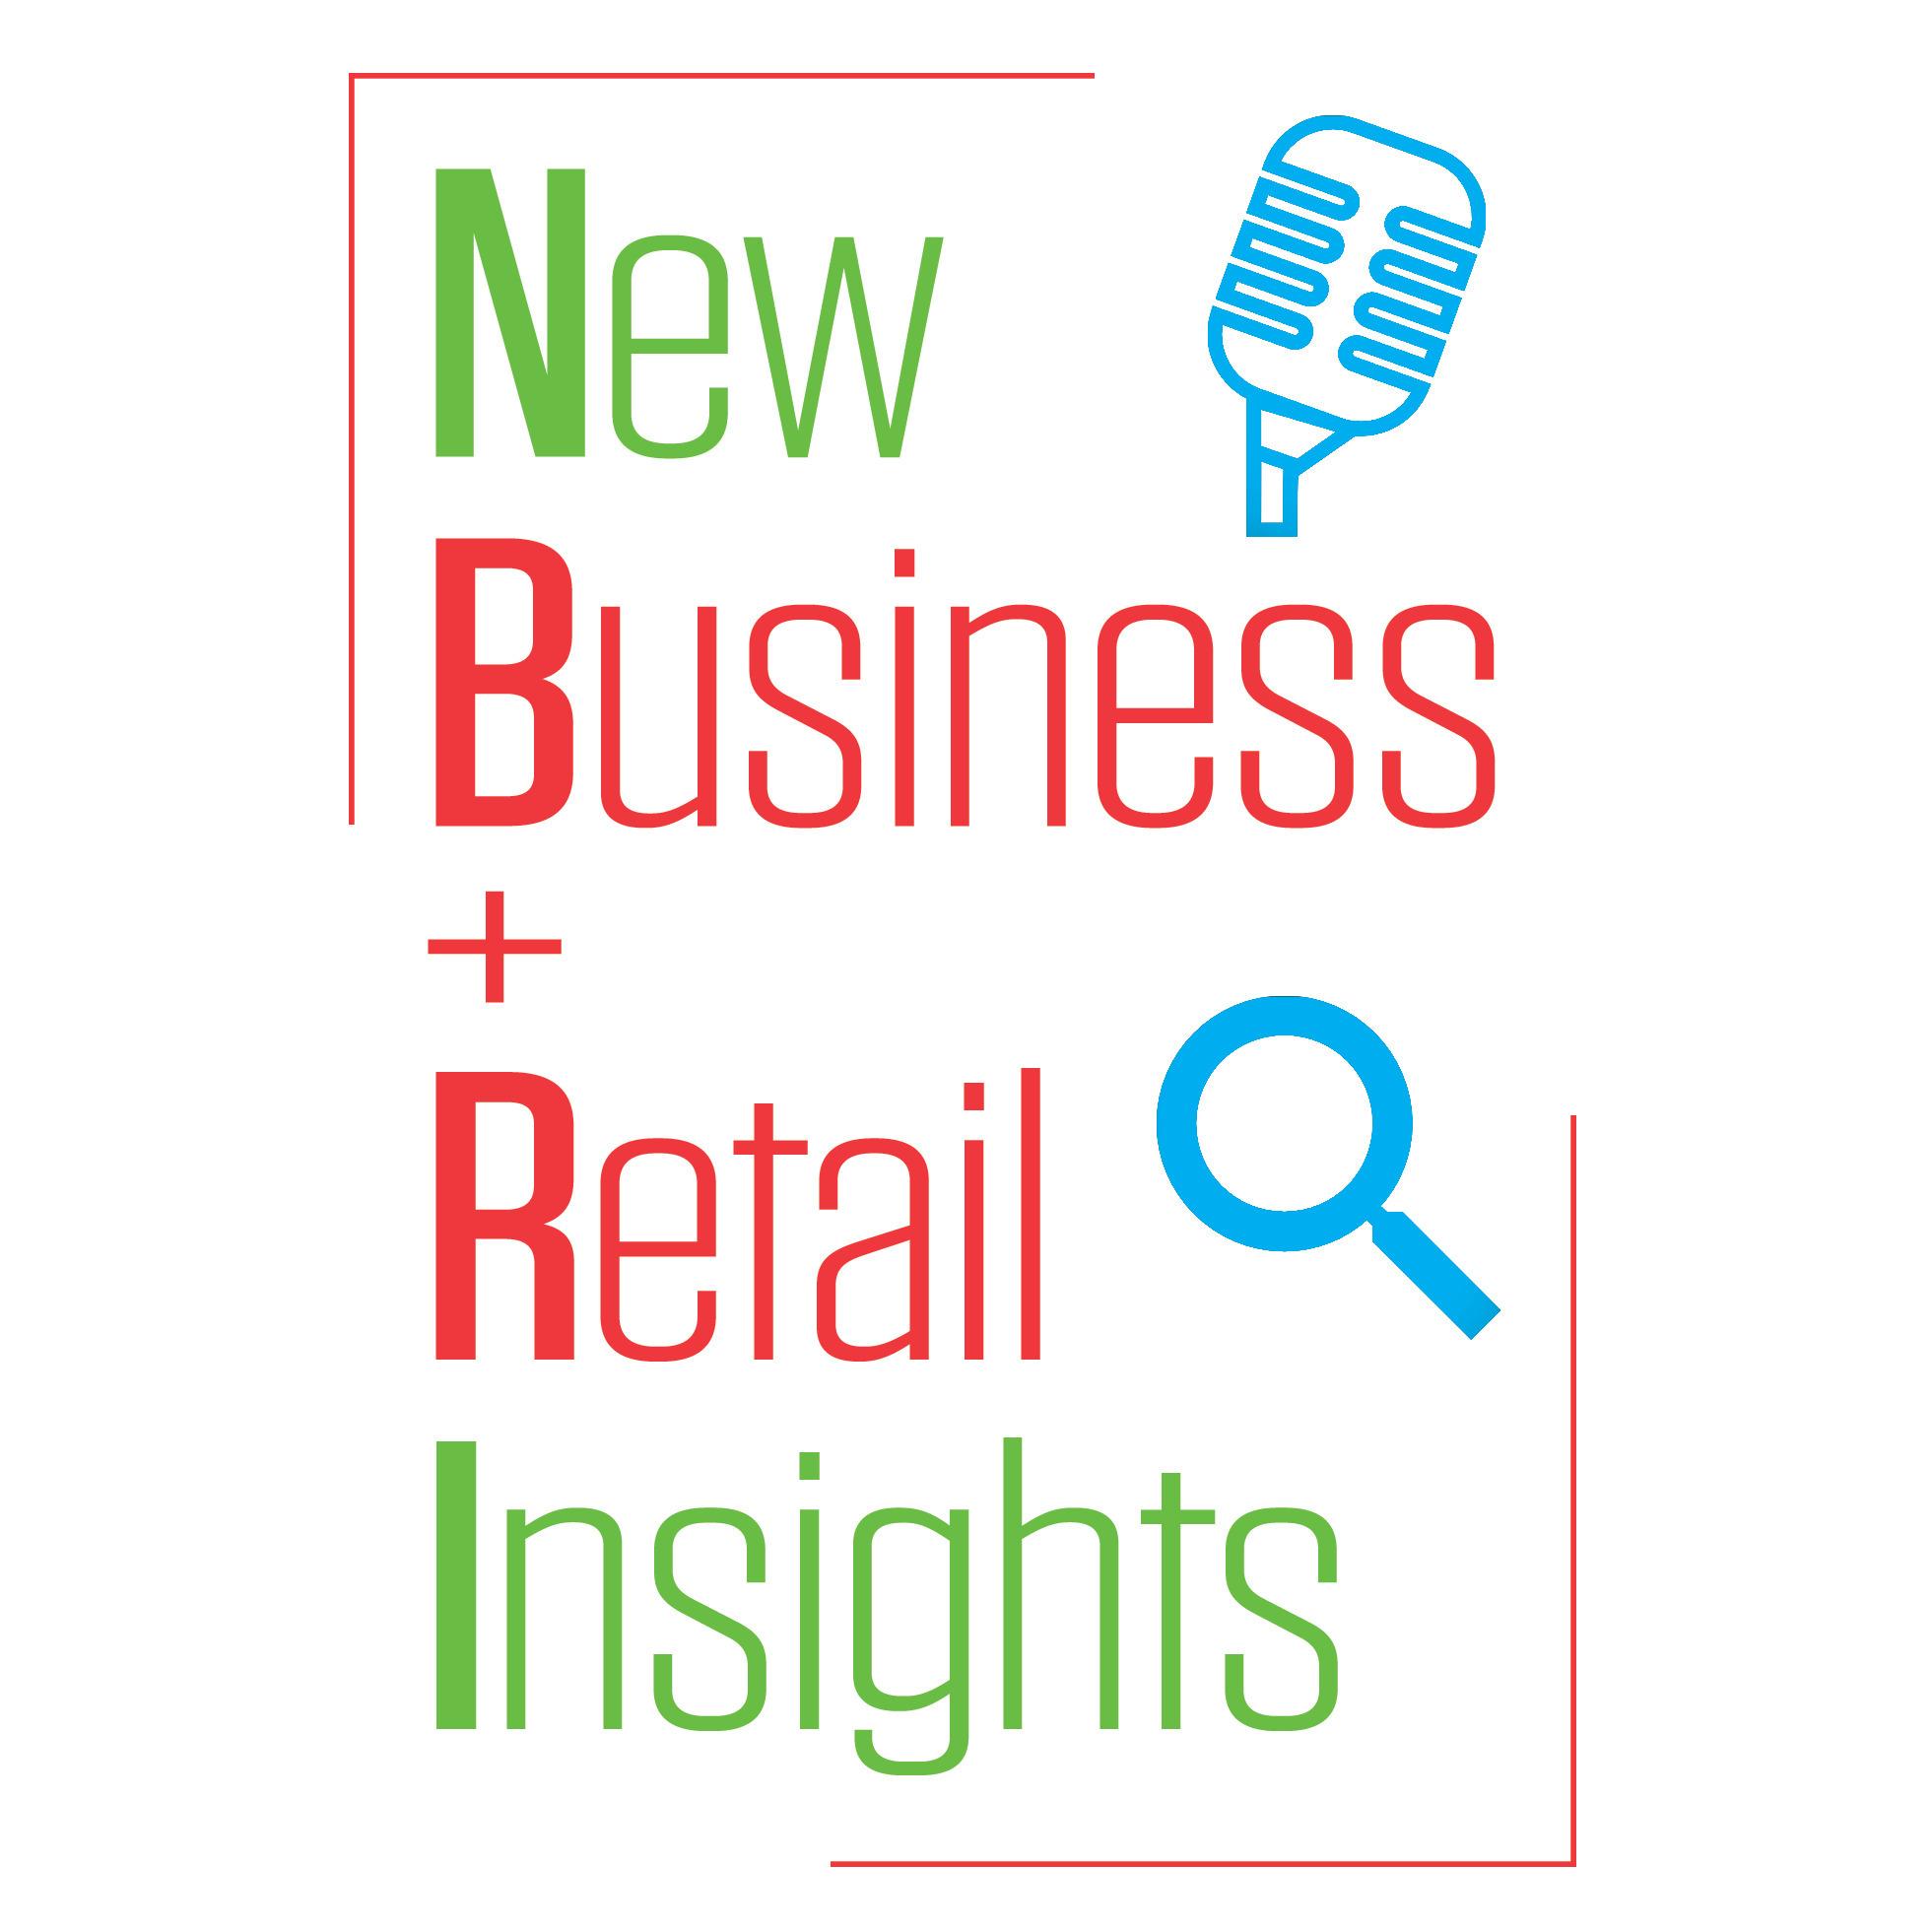 New Business + Retail Insights